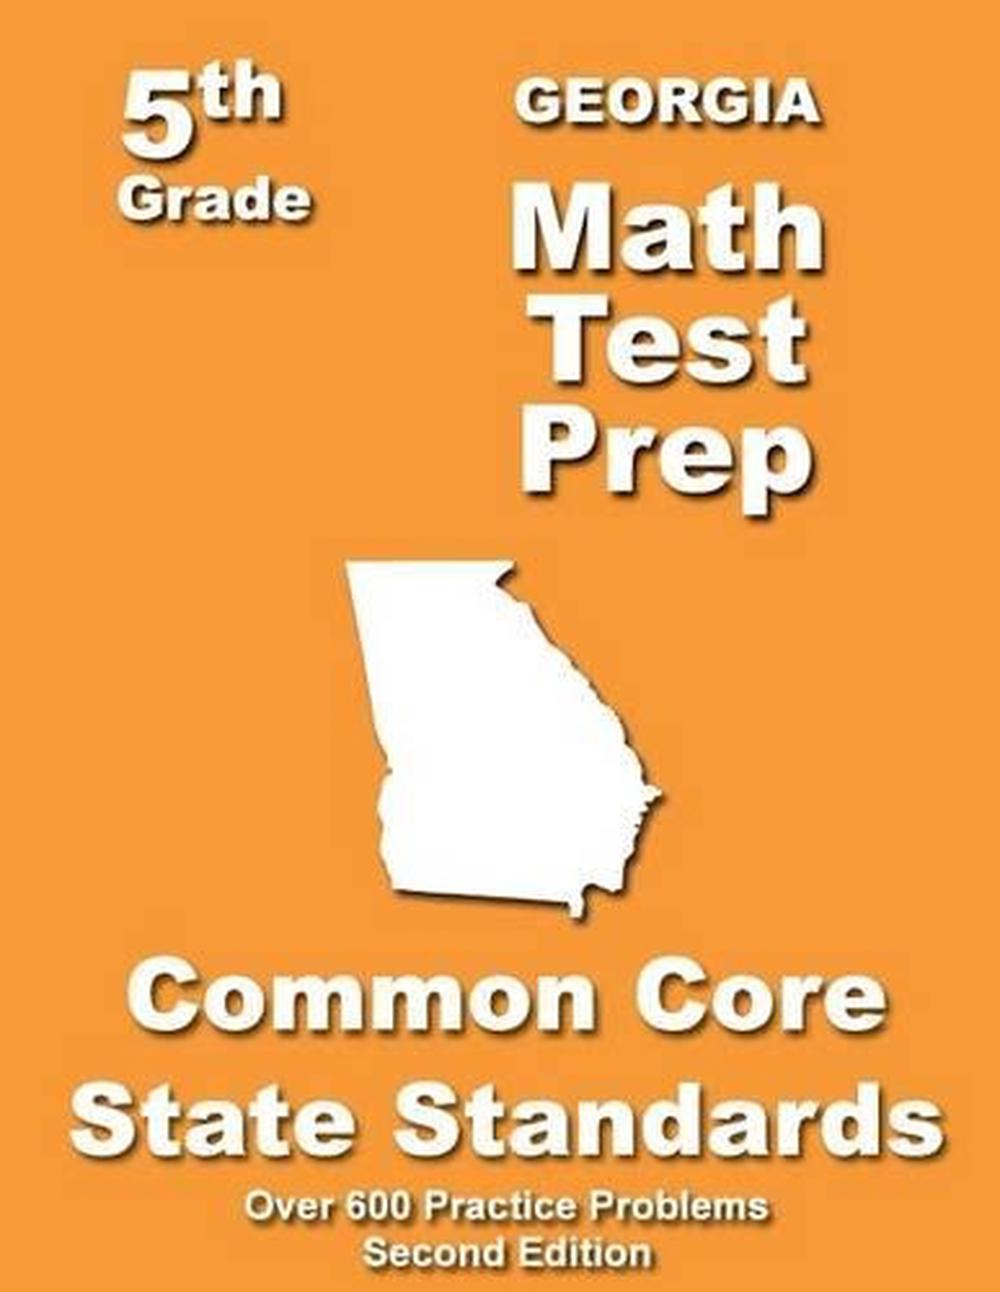 georgia-5th-grade-math-test-prep-common-core-learning-standards-by-teachers-tr-9781491093900